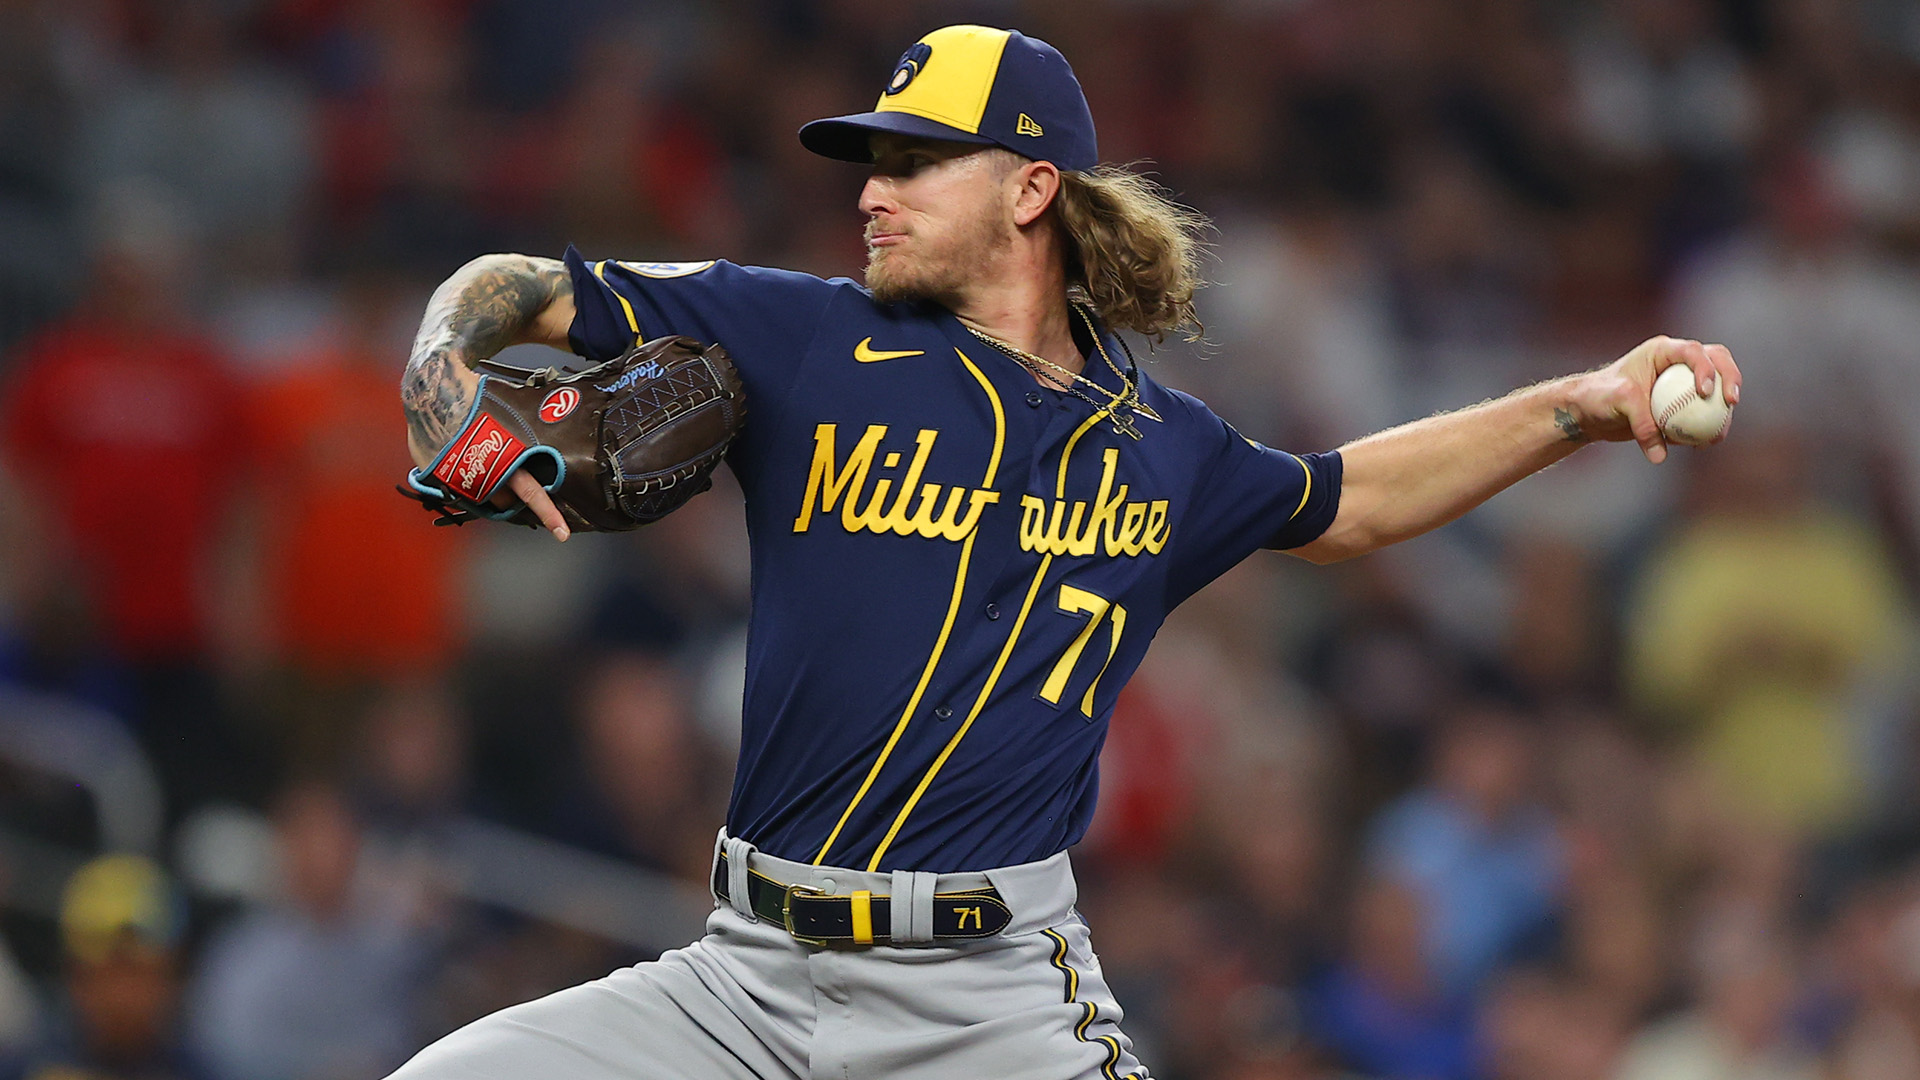 Brewers' Josh Hader leads relief pitchers to watch out for in 2022